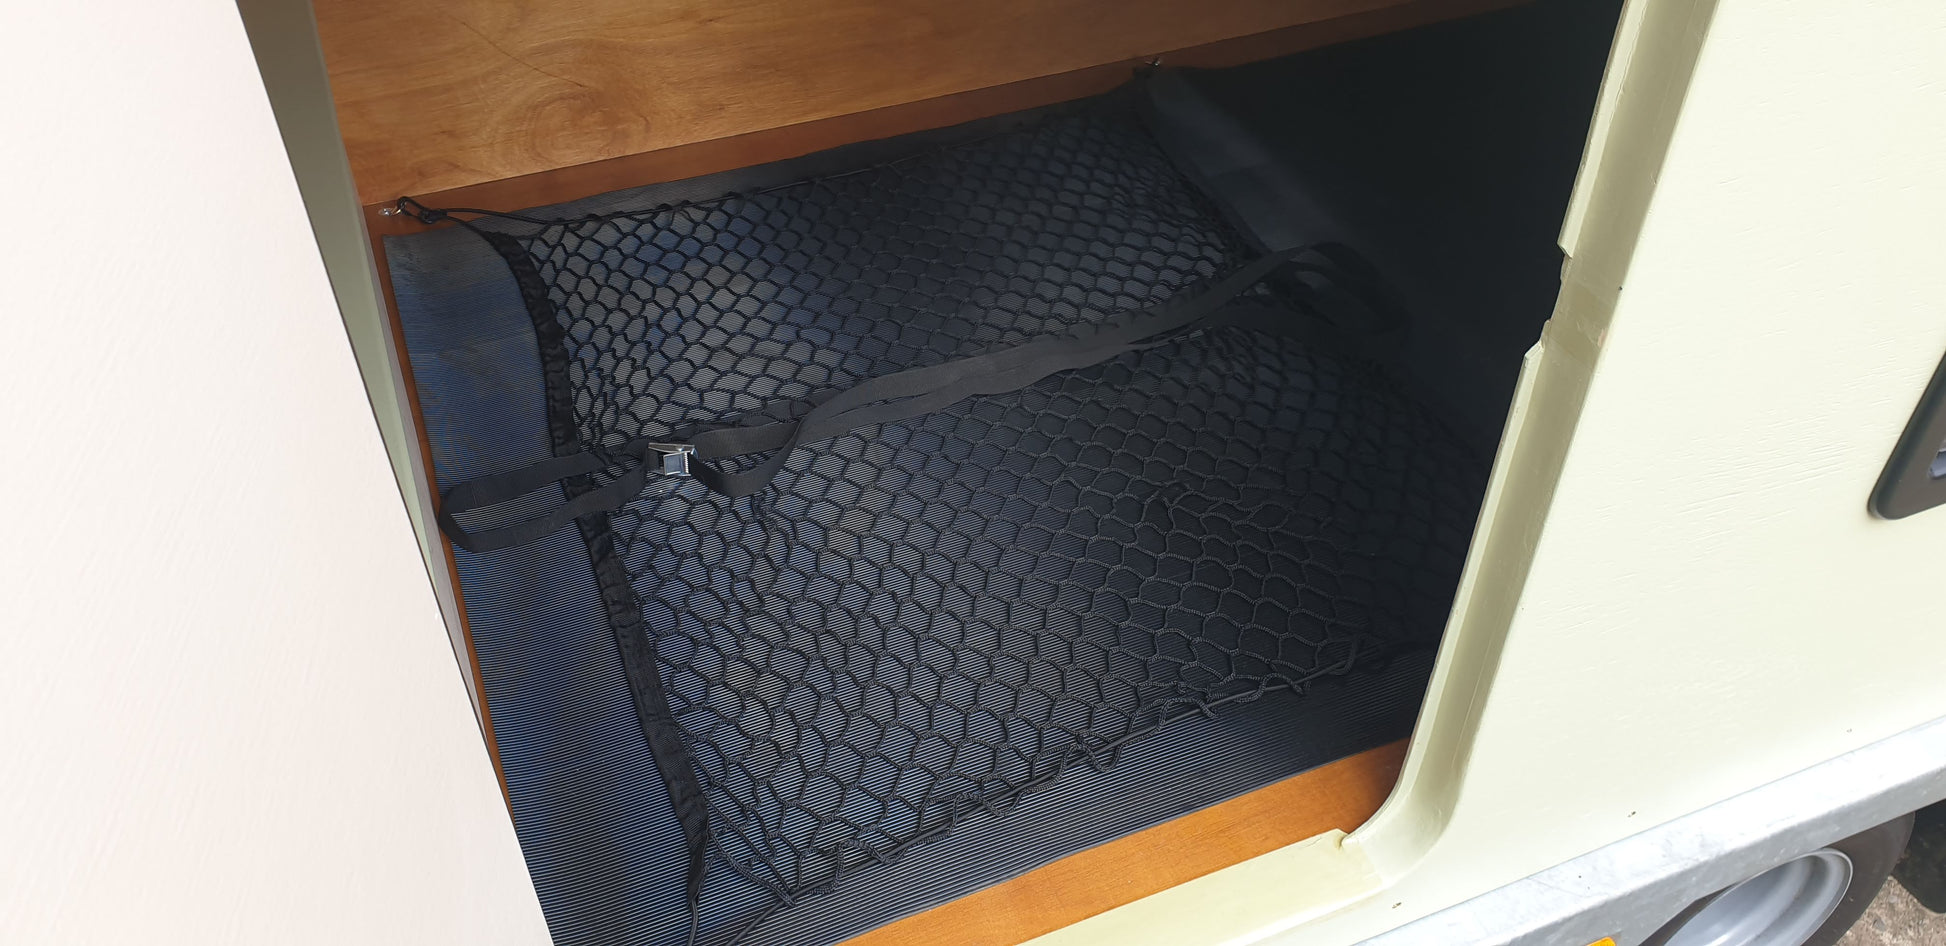 Camping gear storage with elasticated netting and strapping